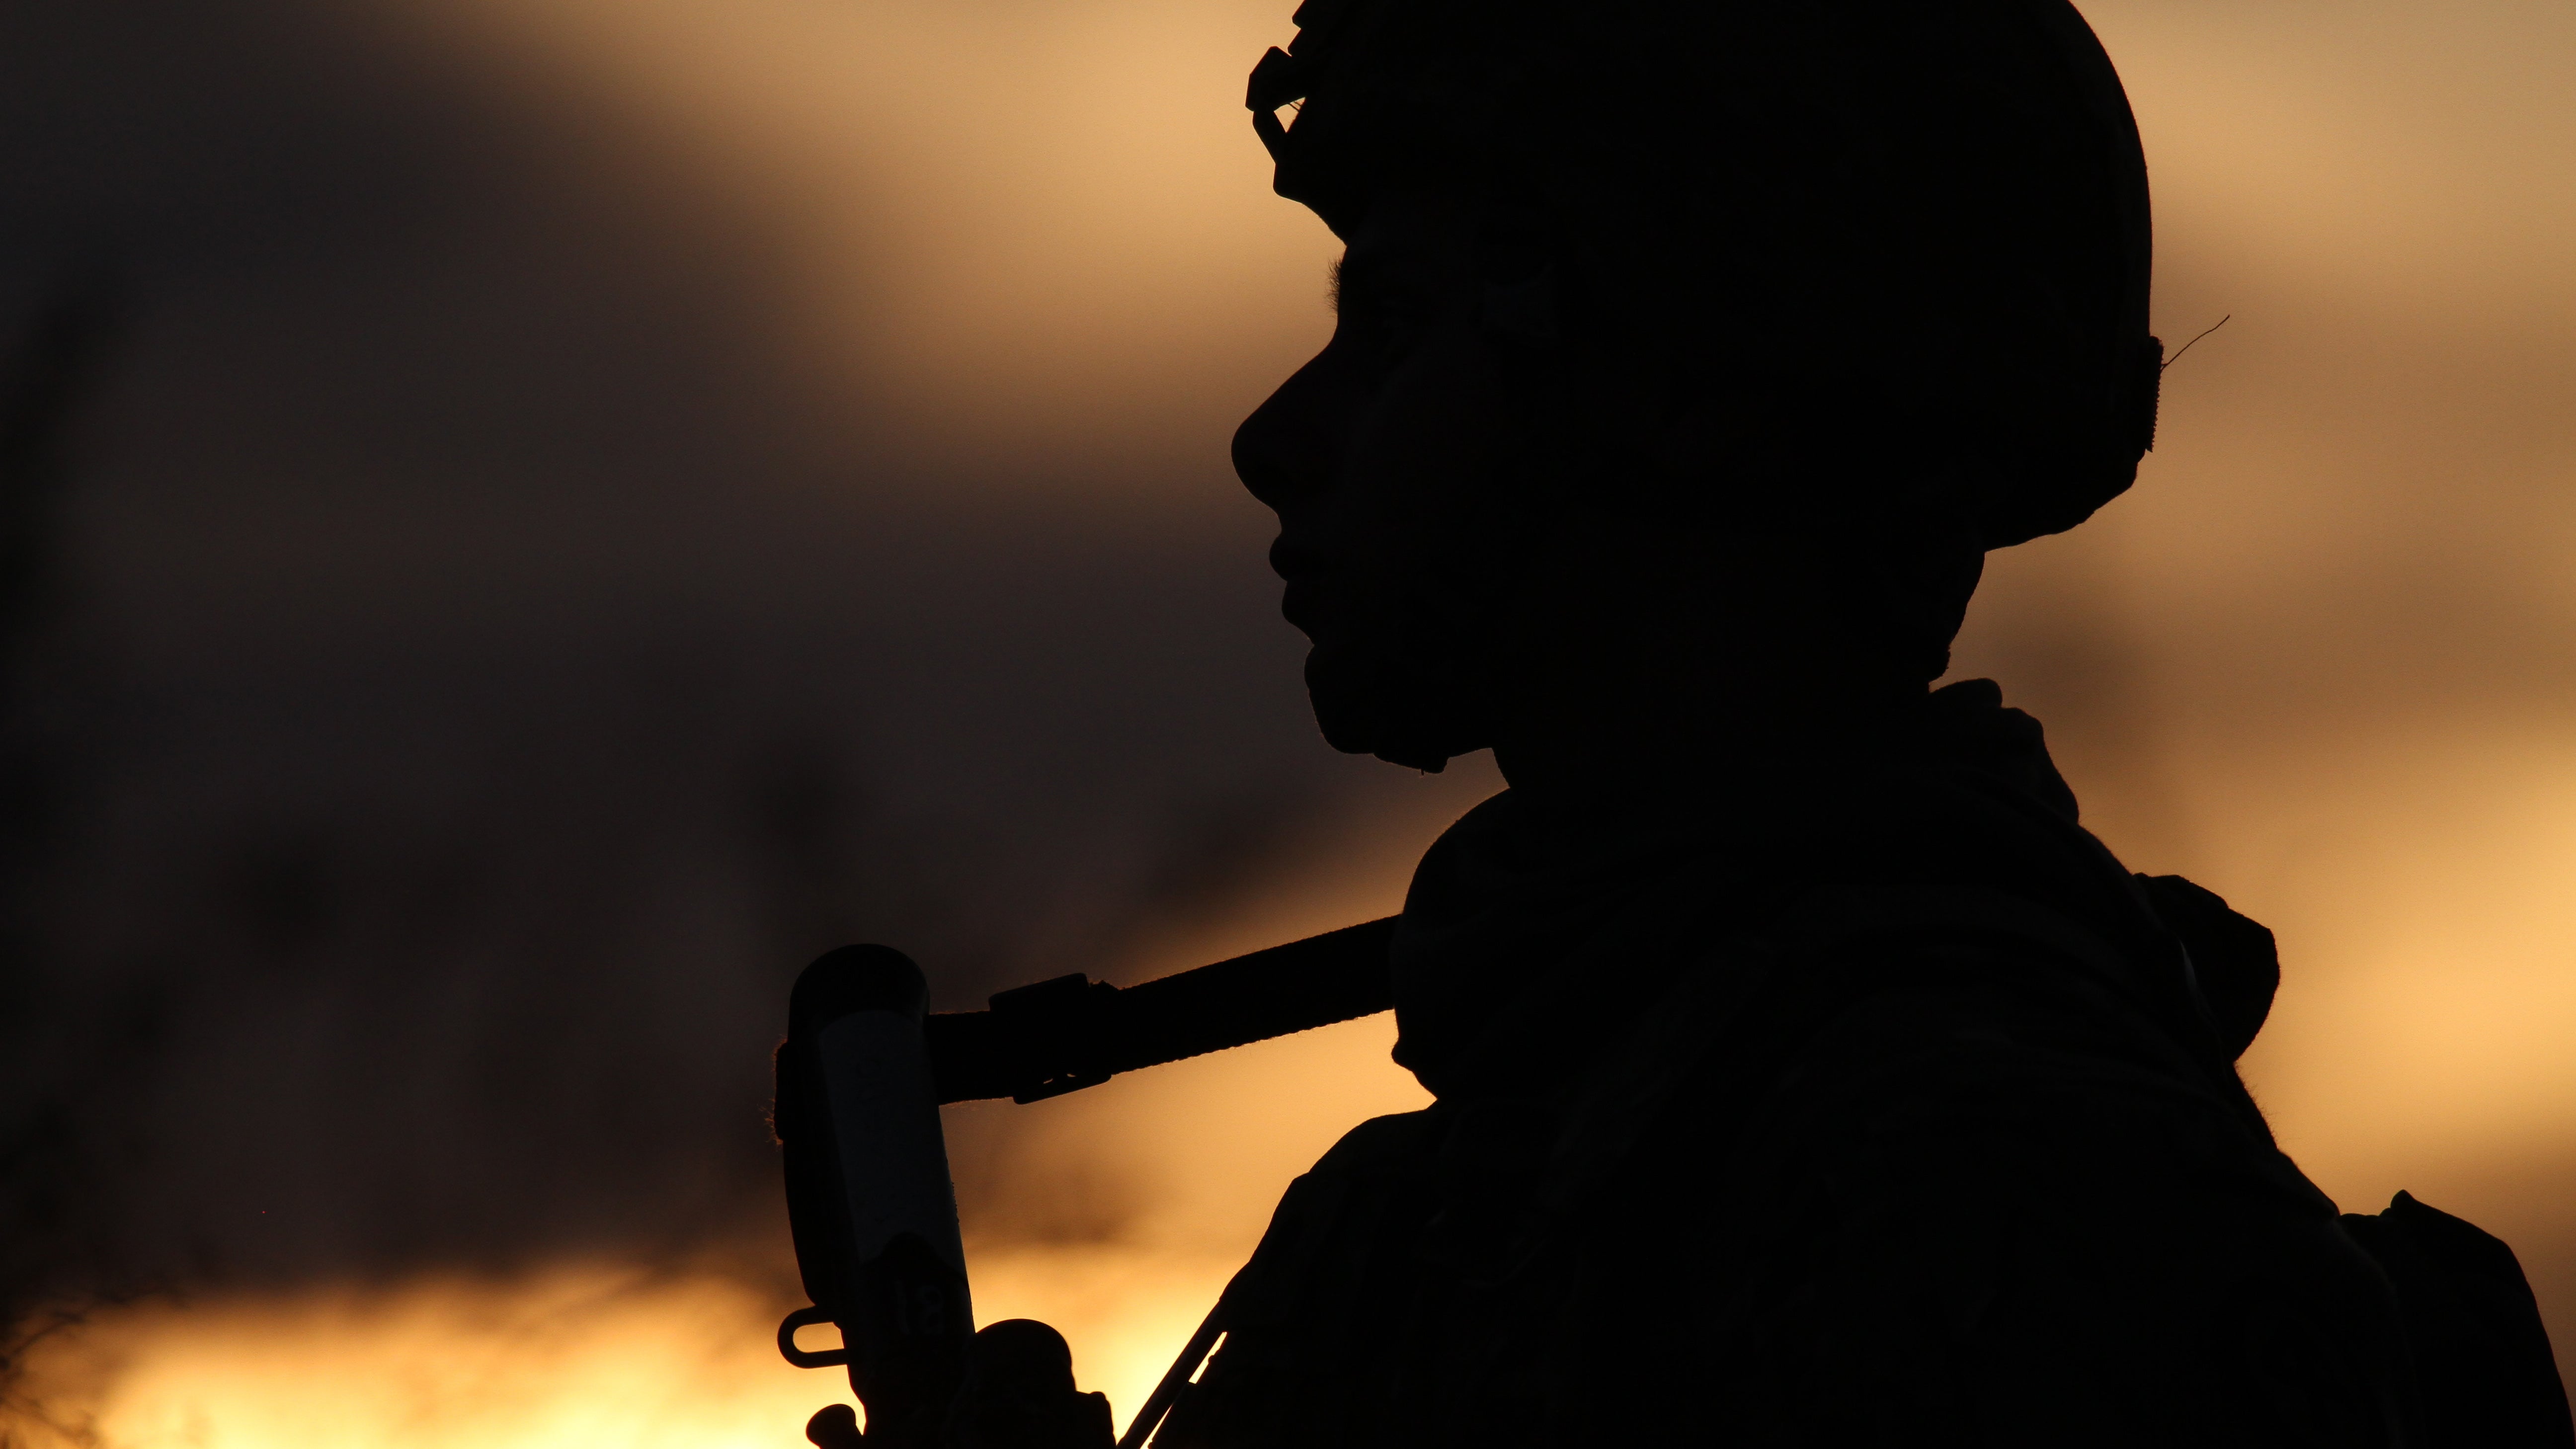 Soldier silhouette